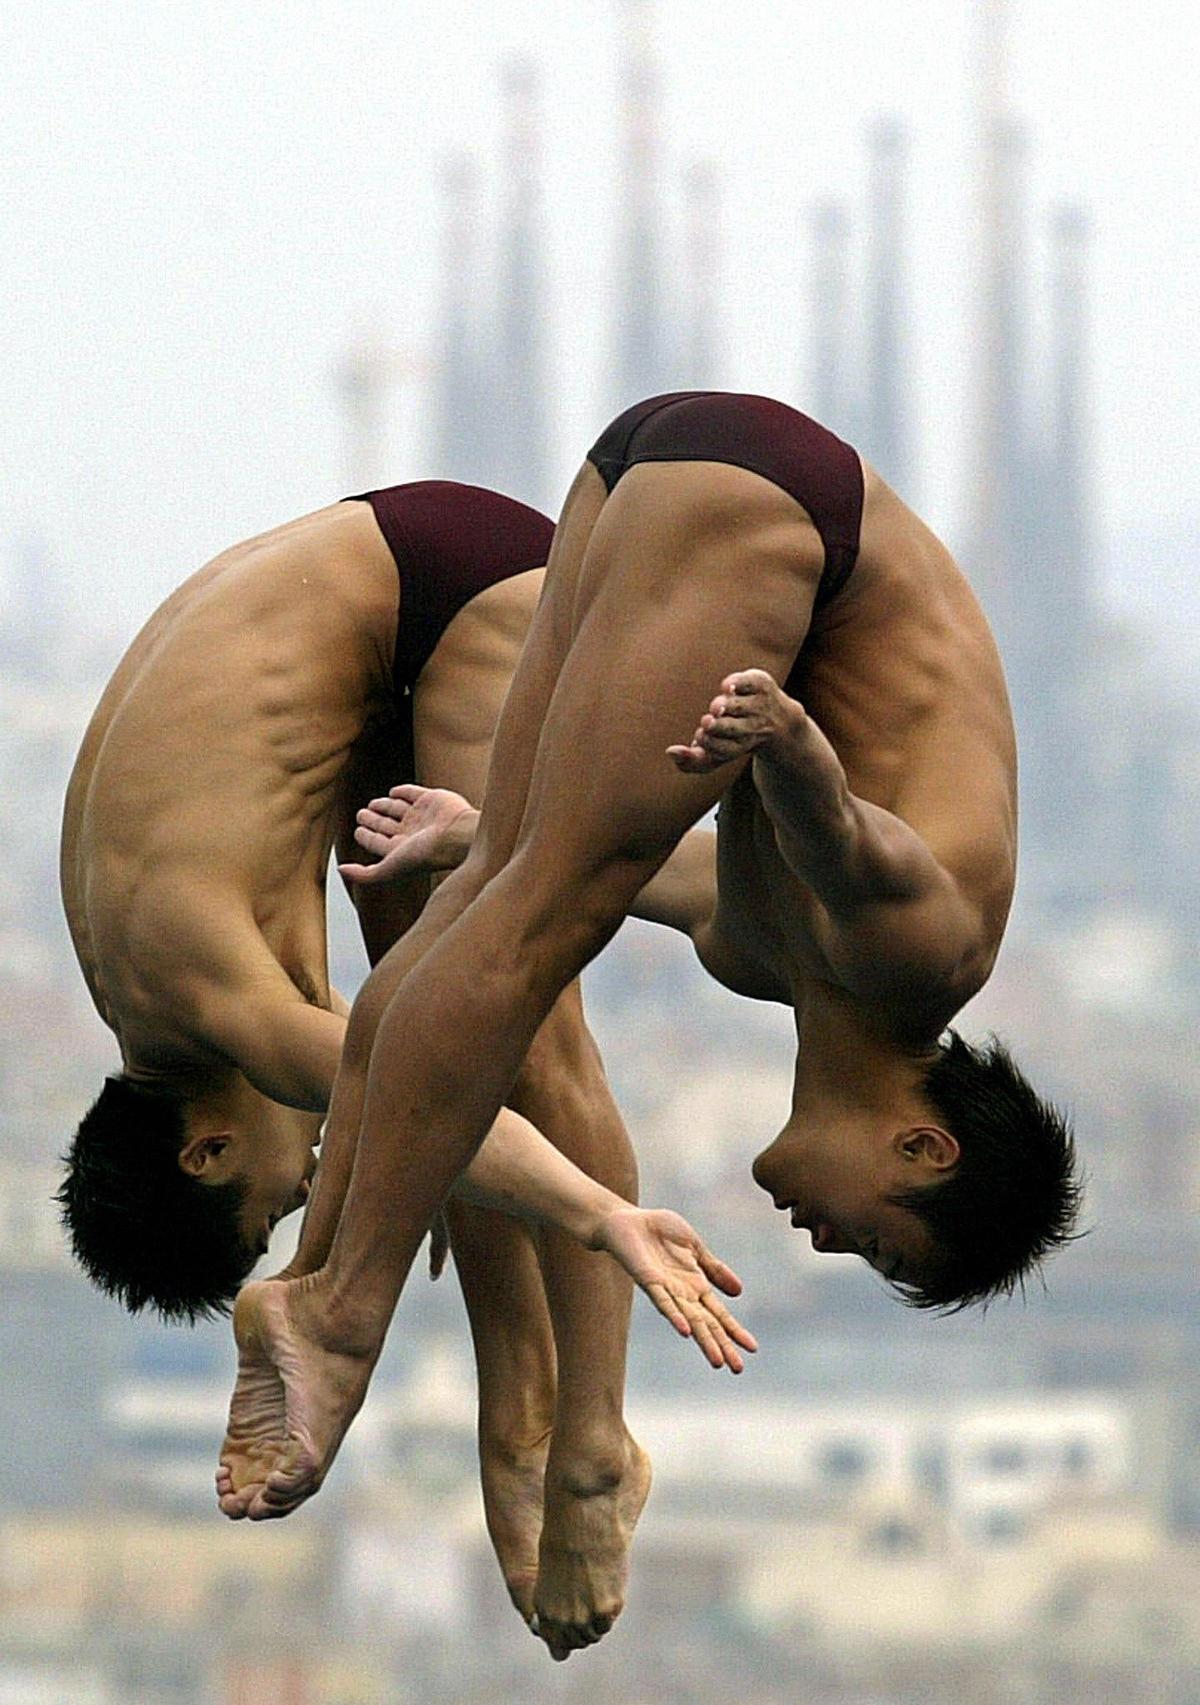 China's Tian Liang and Jia Hu dive at the 10th World Aquatics Championships in Barcelona in 2003. (LLUIS GENE/AFP/Getty Images)